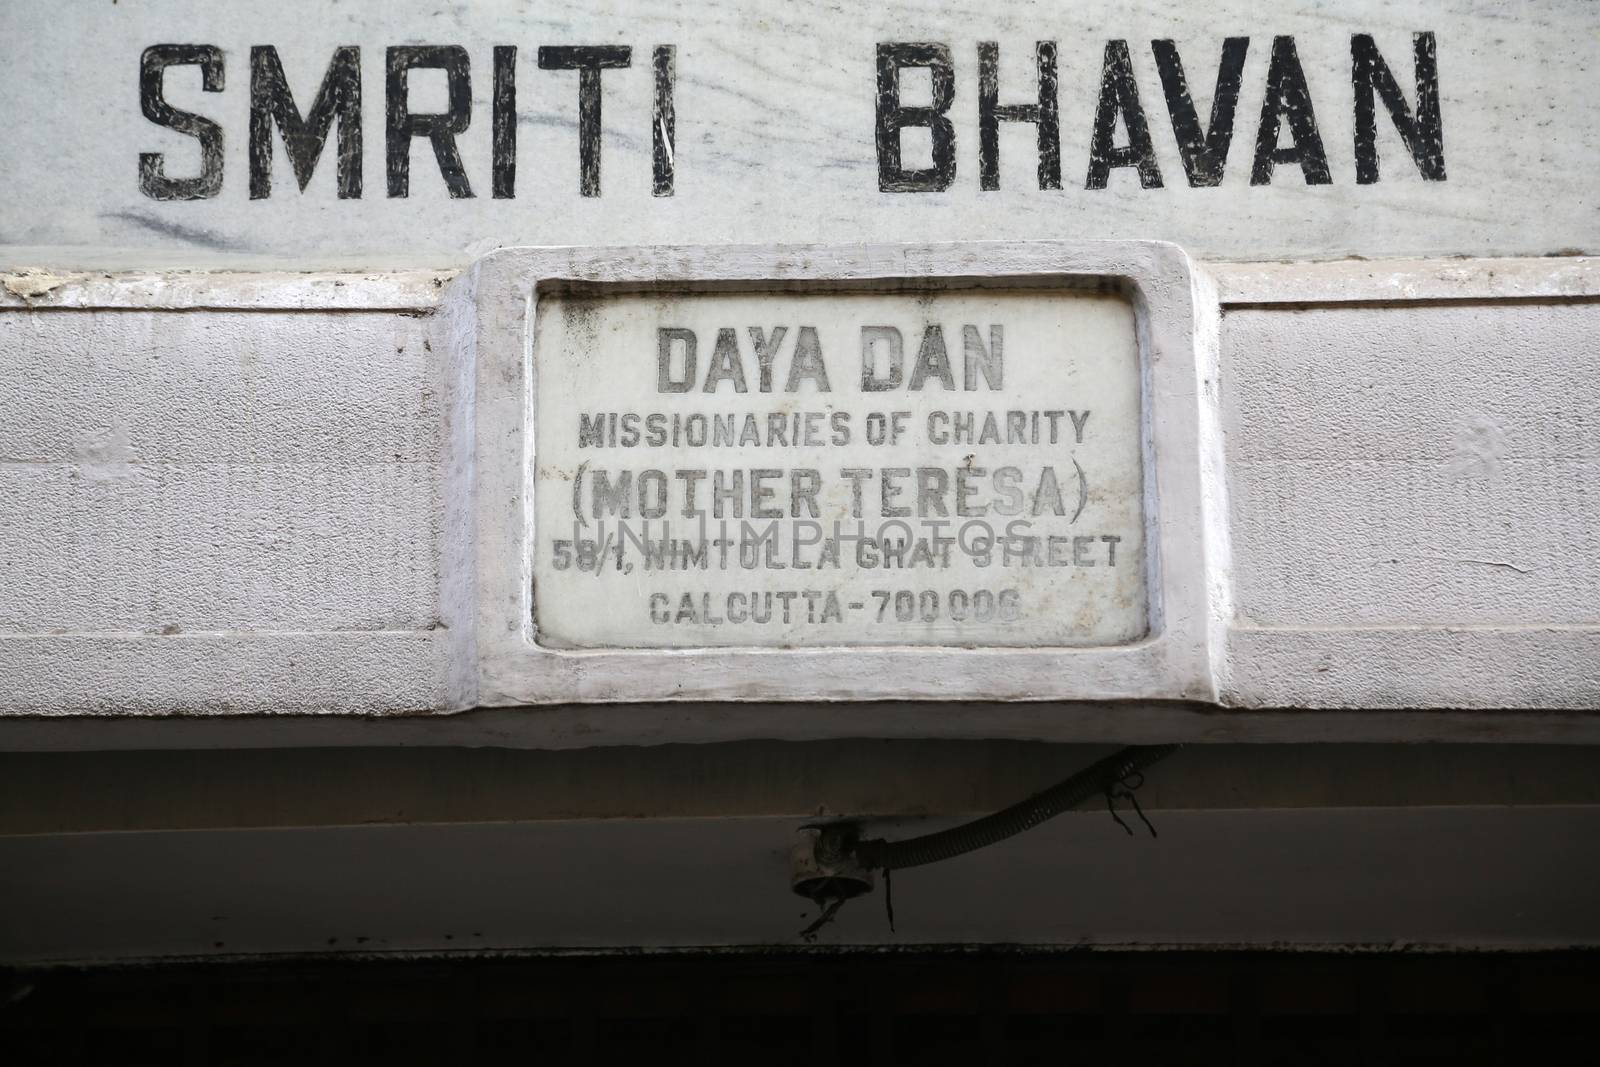 Daya Dan, one of the houses established by Mother Teresa and run by the Missionaries of Charity in Kolkata by atlas